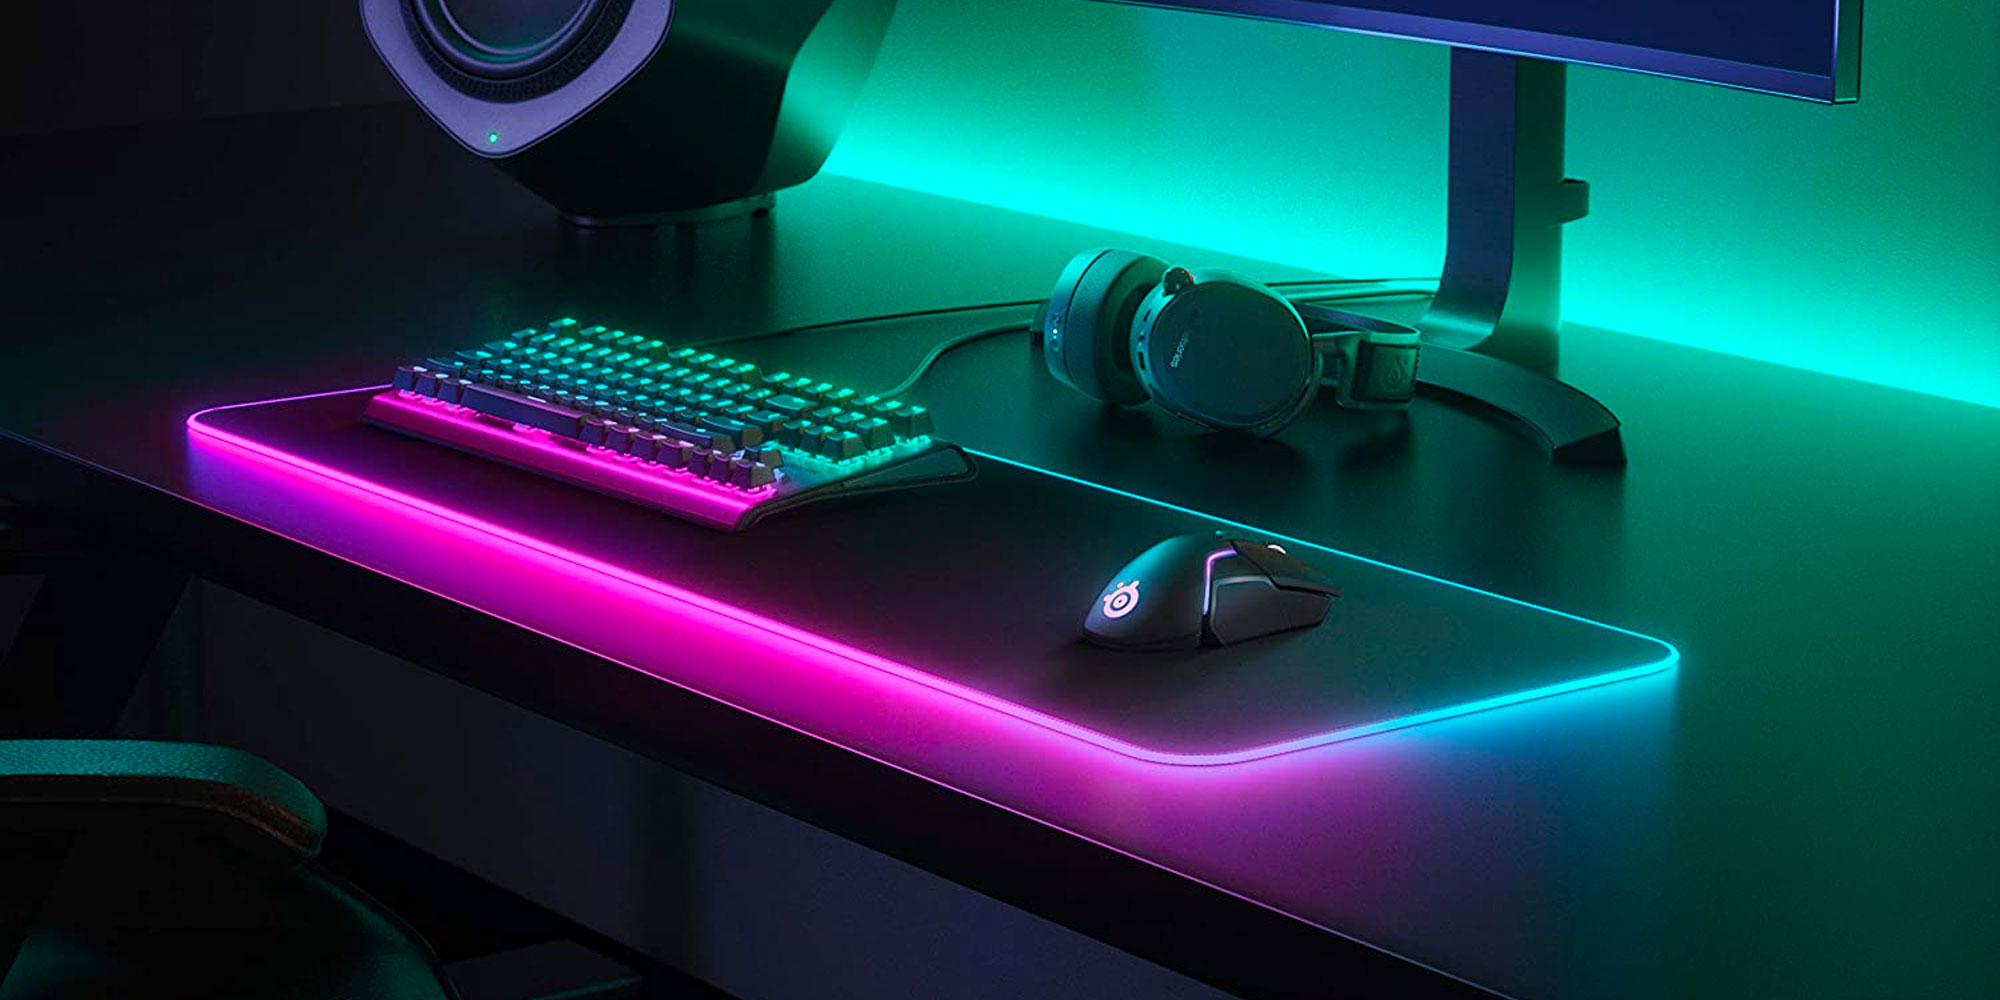 https://9to5toys.com/wp-content/uploads/sites/5/2022/03/steelseries-qck-rgb-prism-gaming-mouse-pad.jpg